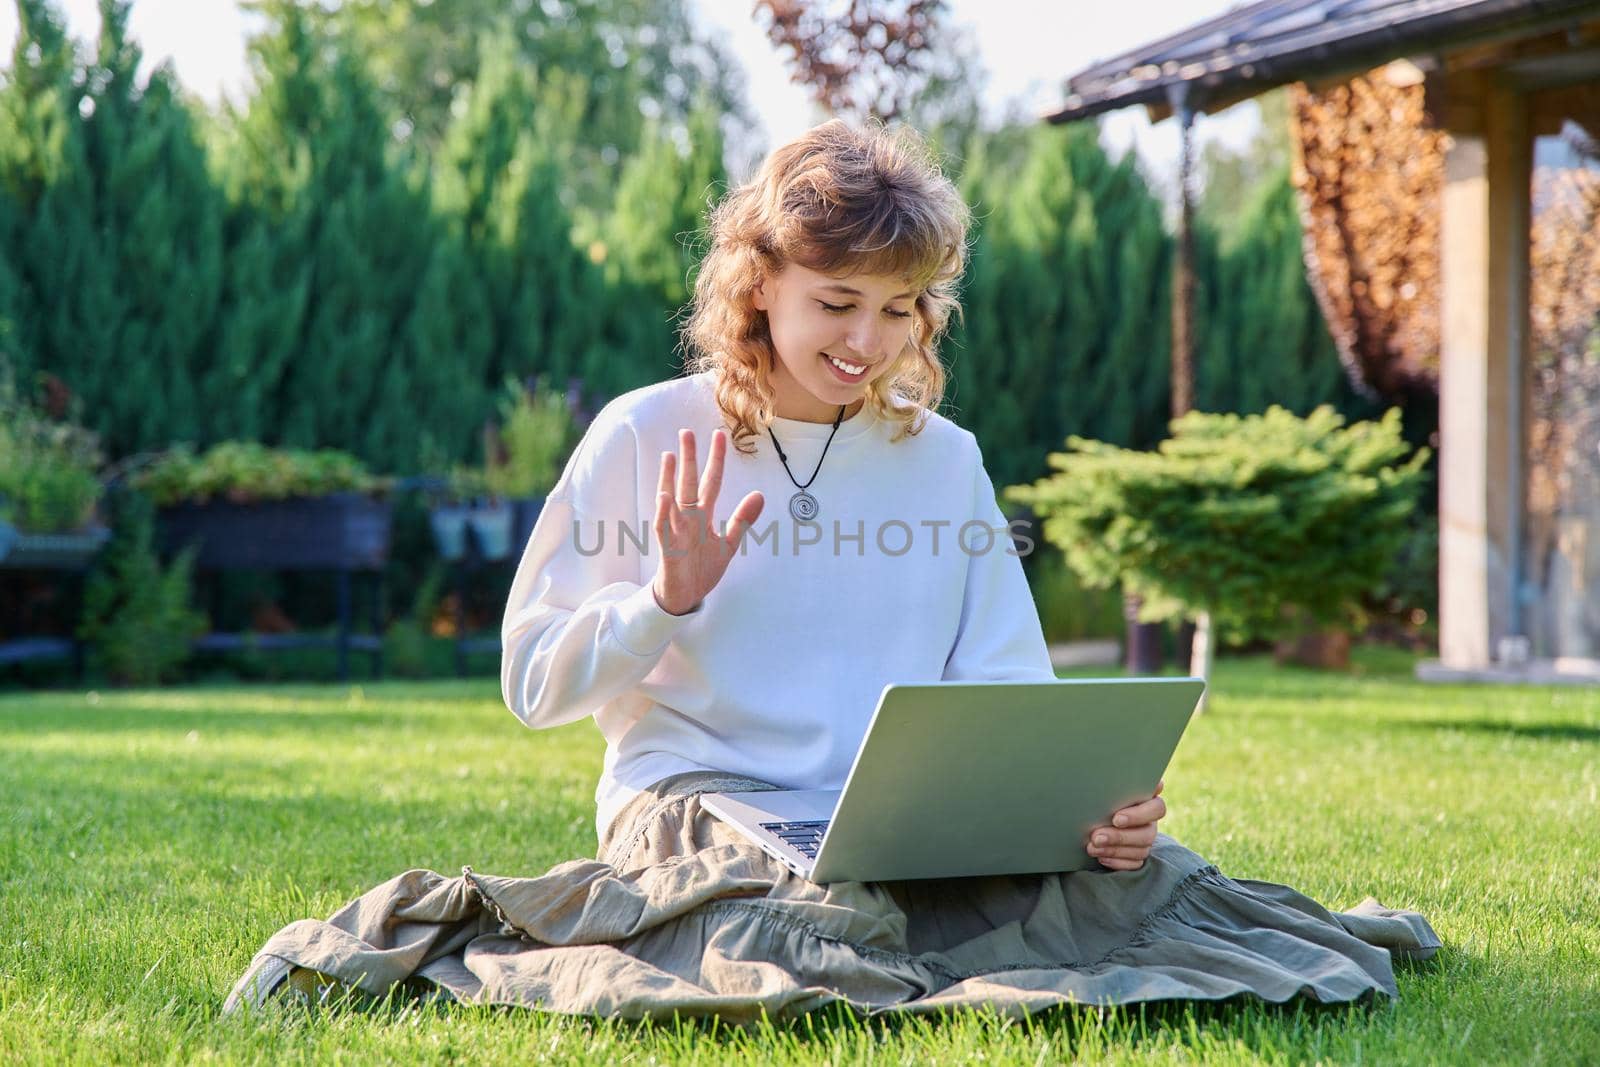 Teen girl using laptop for video communication, waving hand looking at screen, sitting on lawn green grass in backyard. Technology, chat conference video call, lifestyle, adolescence